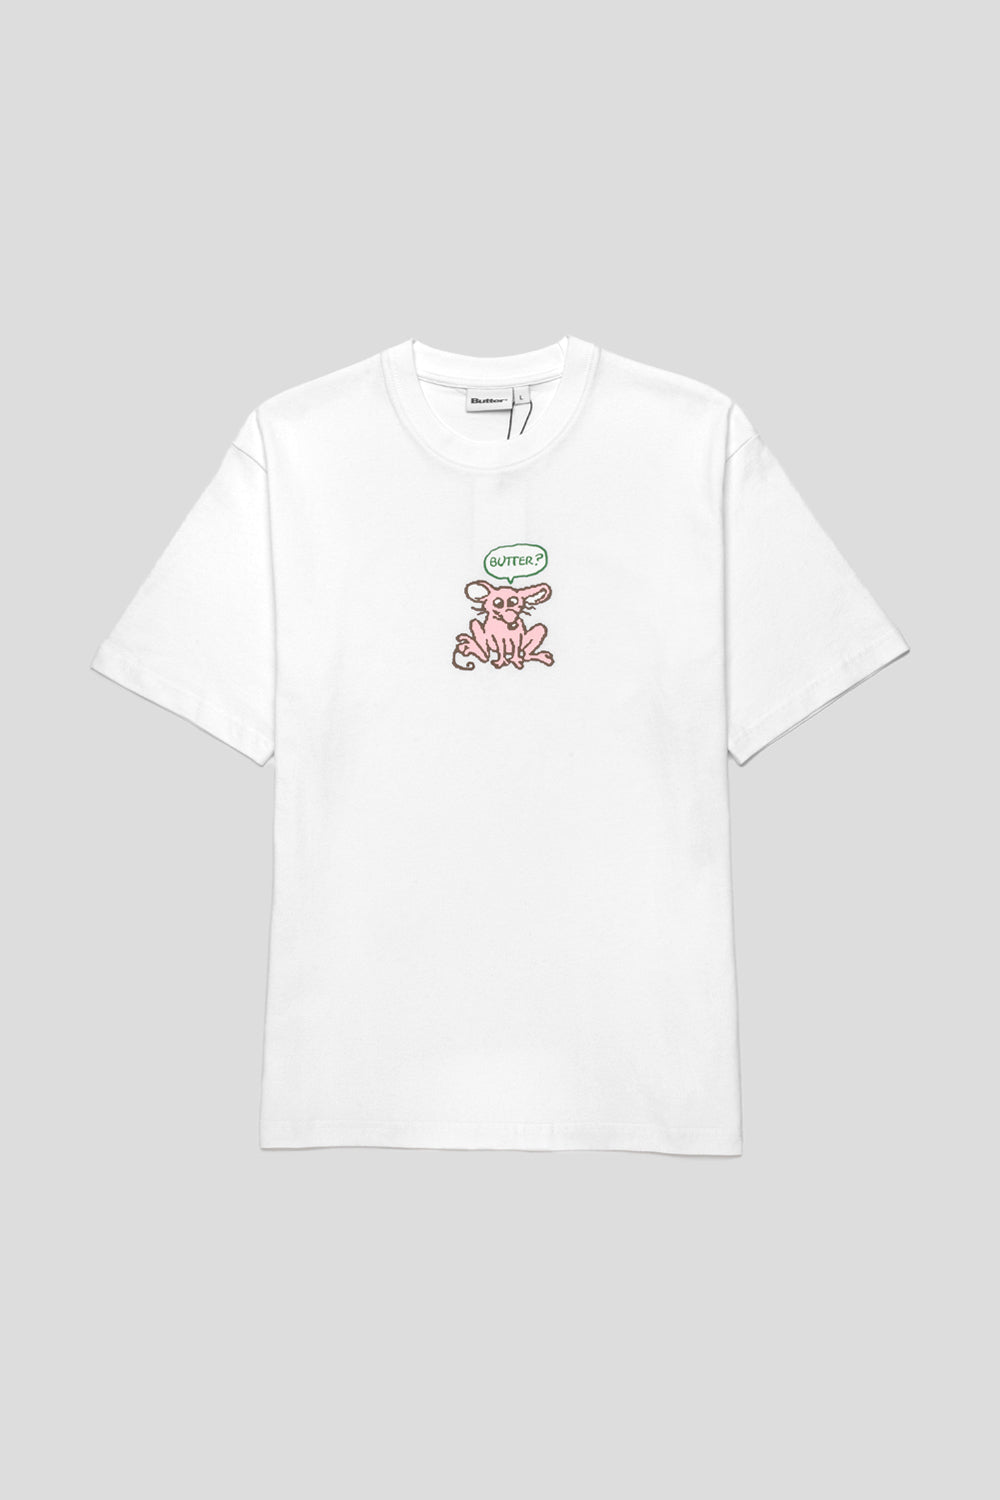 Rodent Tee